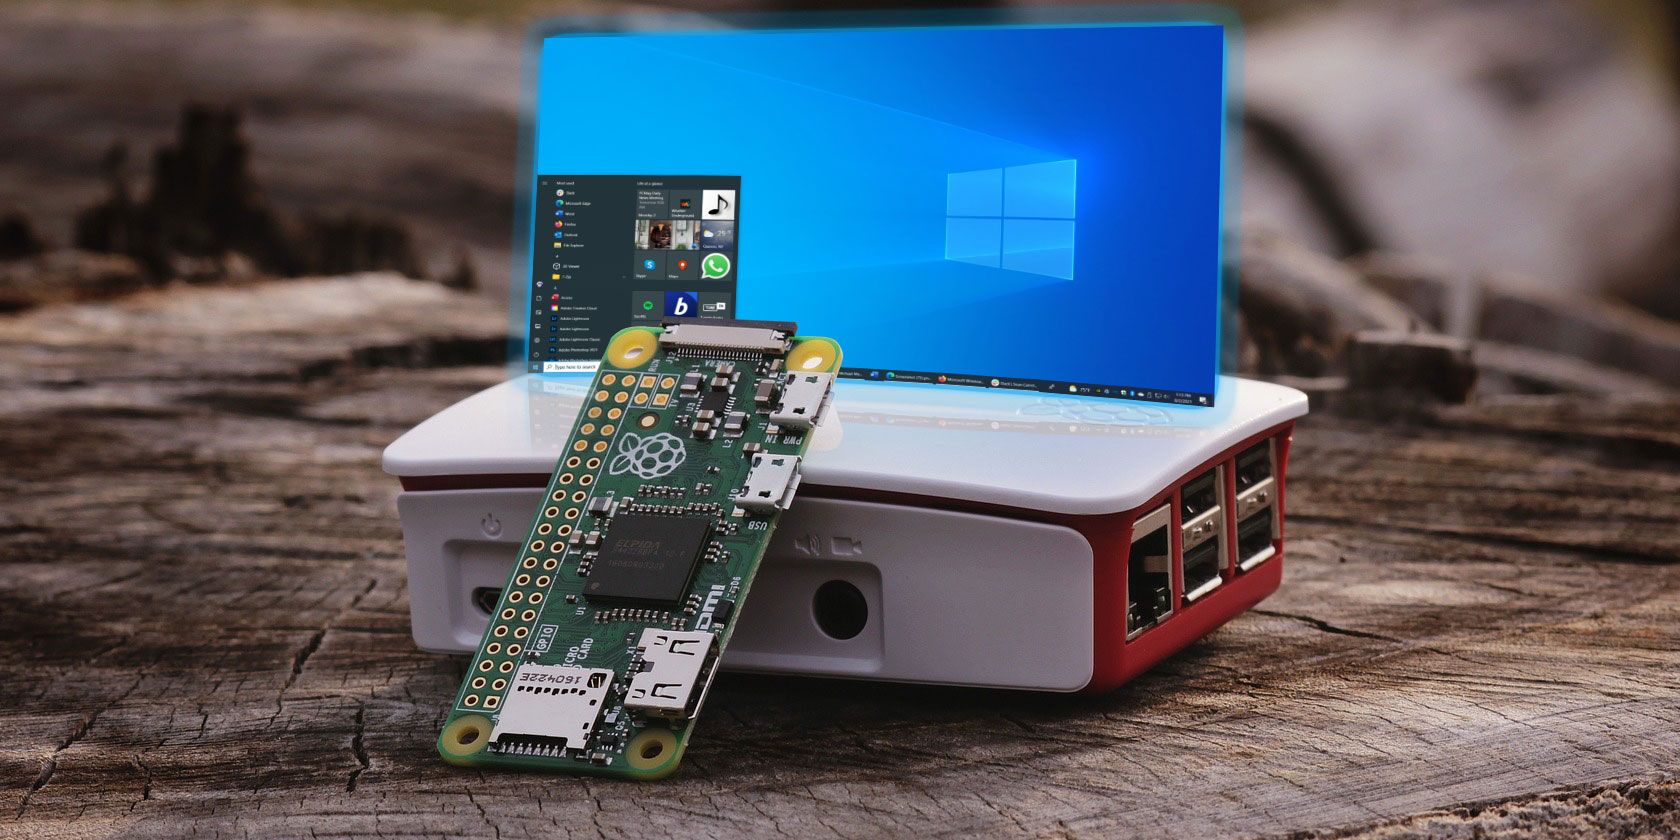 Raspberry Pi with Windows 10 screen on top